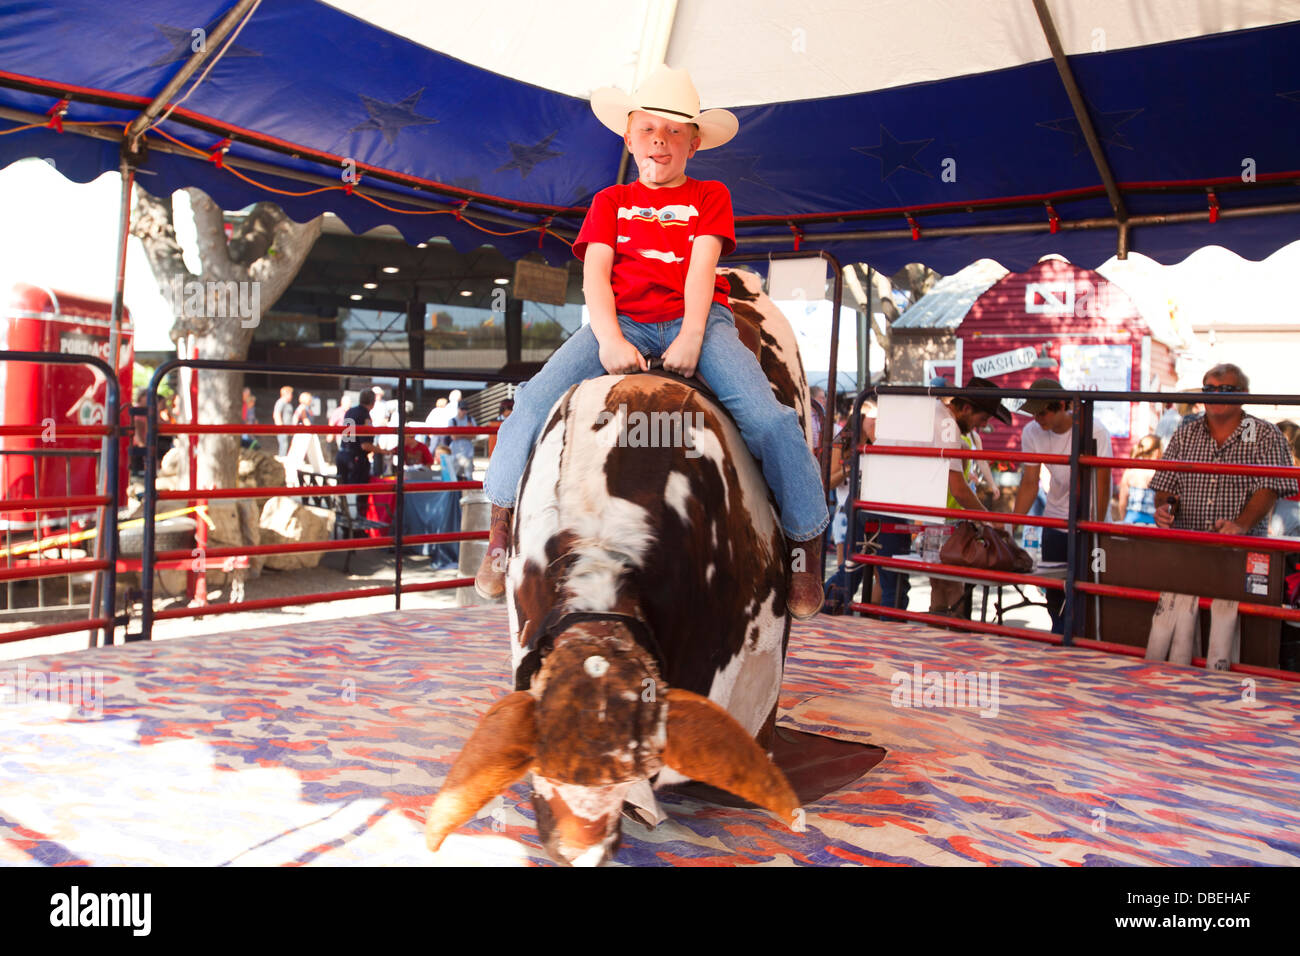 Young Cowboy riding a mechanical bull. California Mid State Fair, Paso Robles, California, United States of America Stock Photo